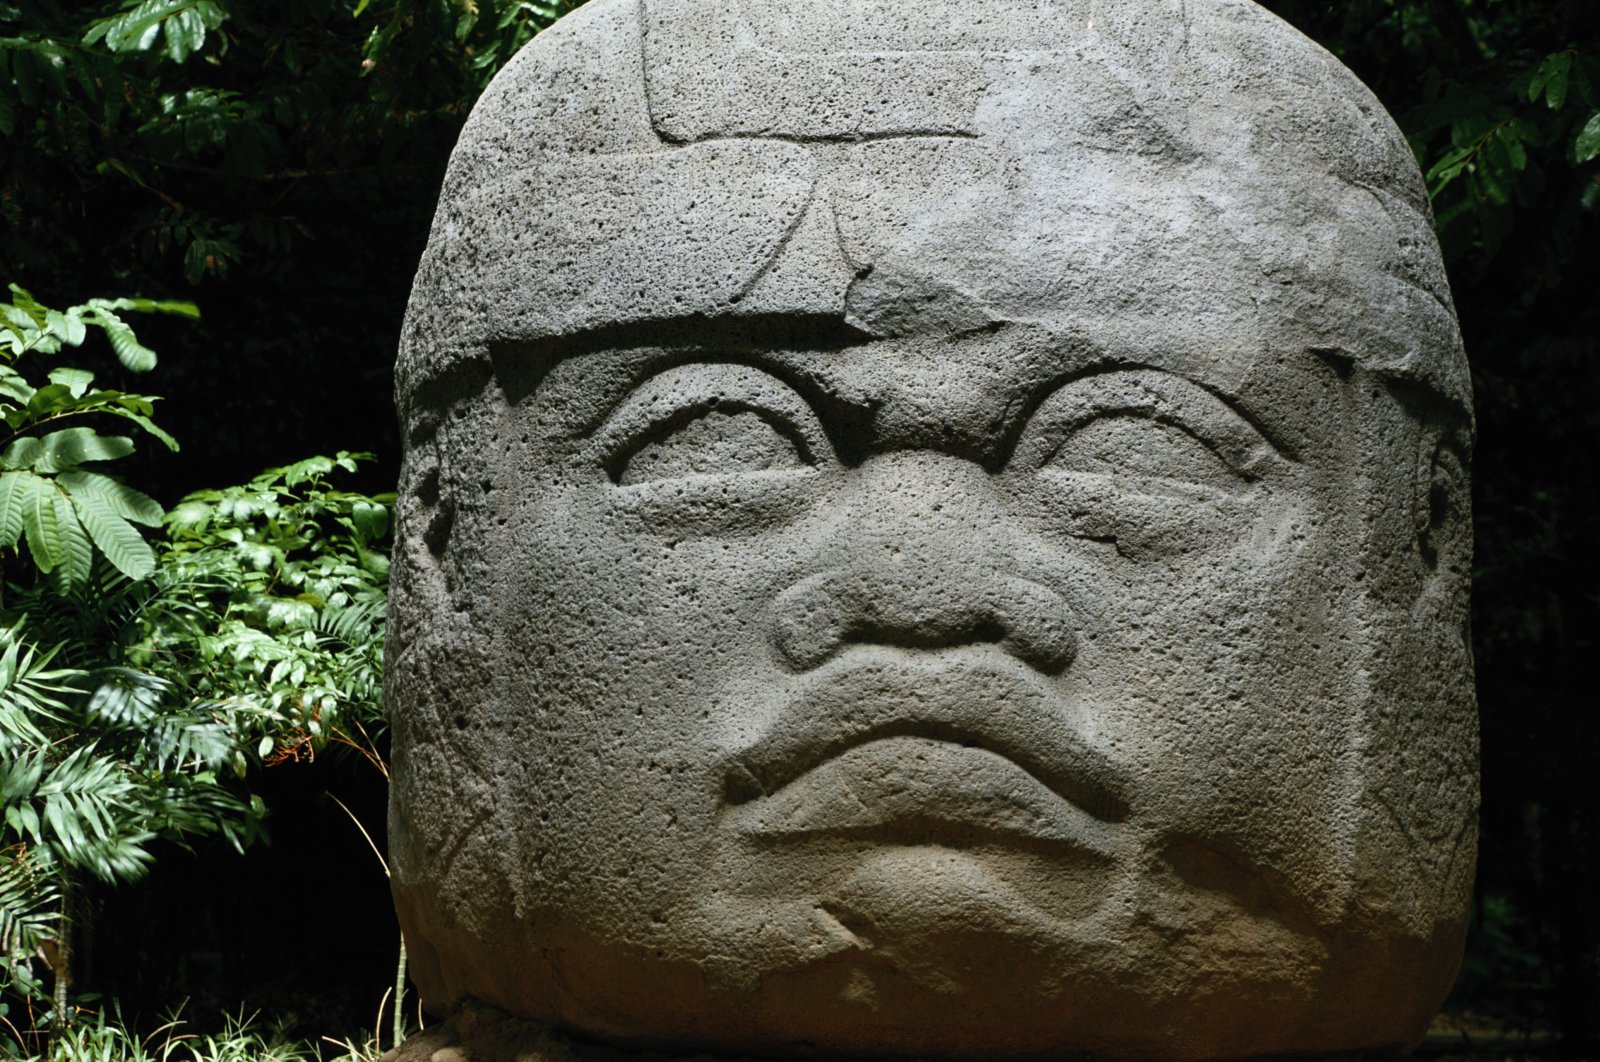 One of Olmec head. (Getty Images Photo)